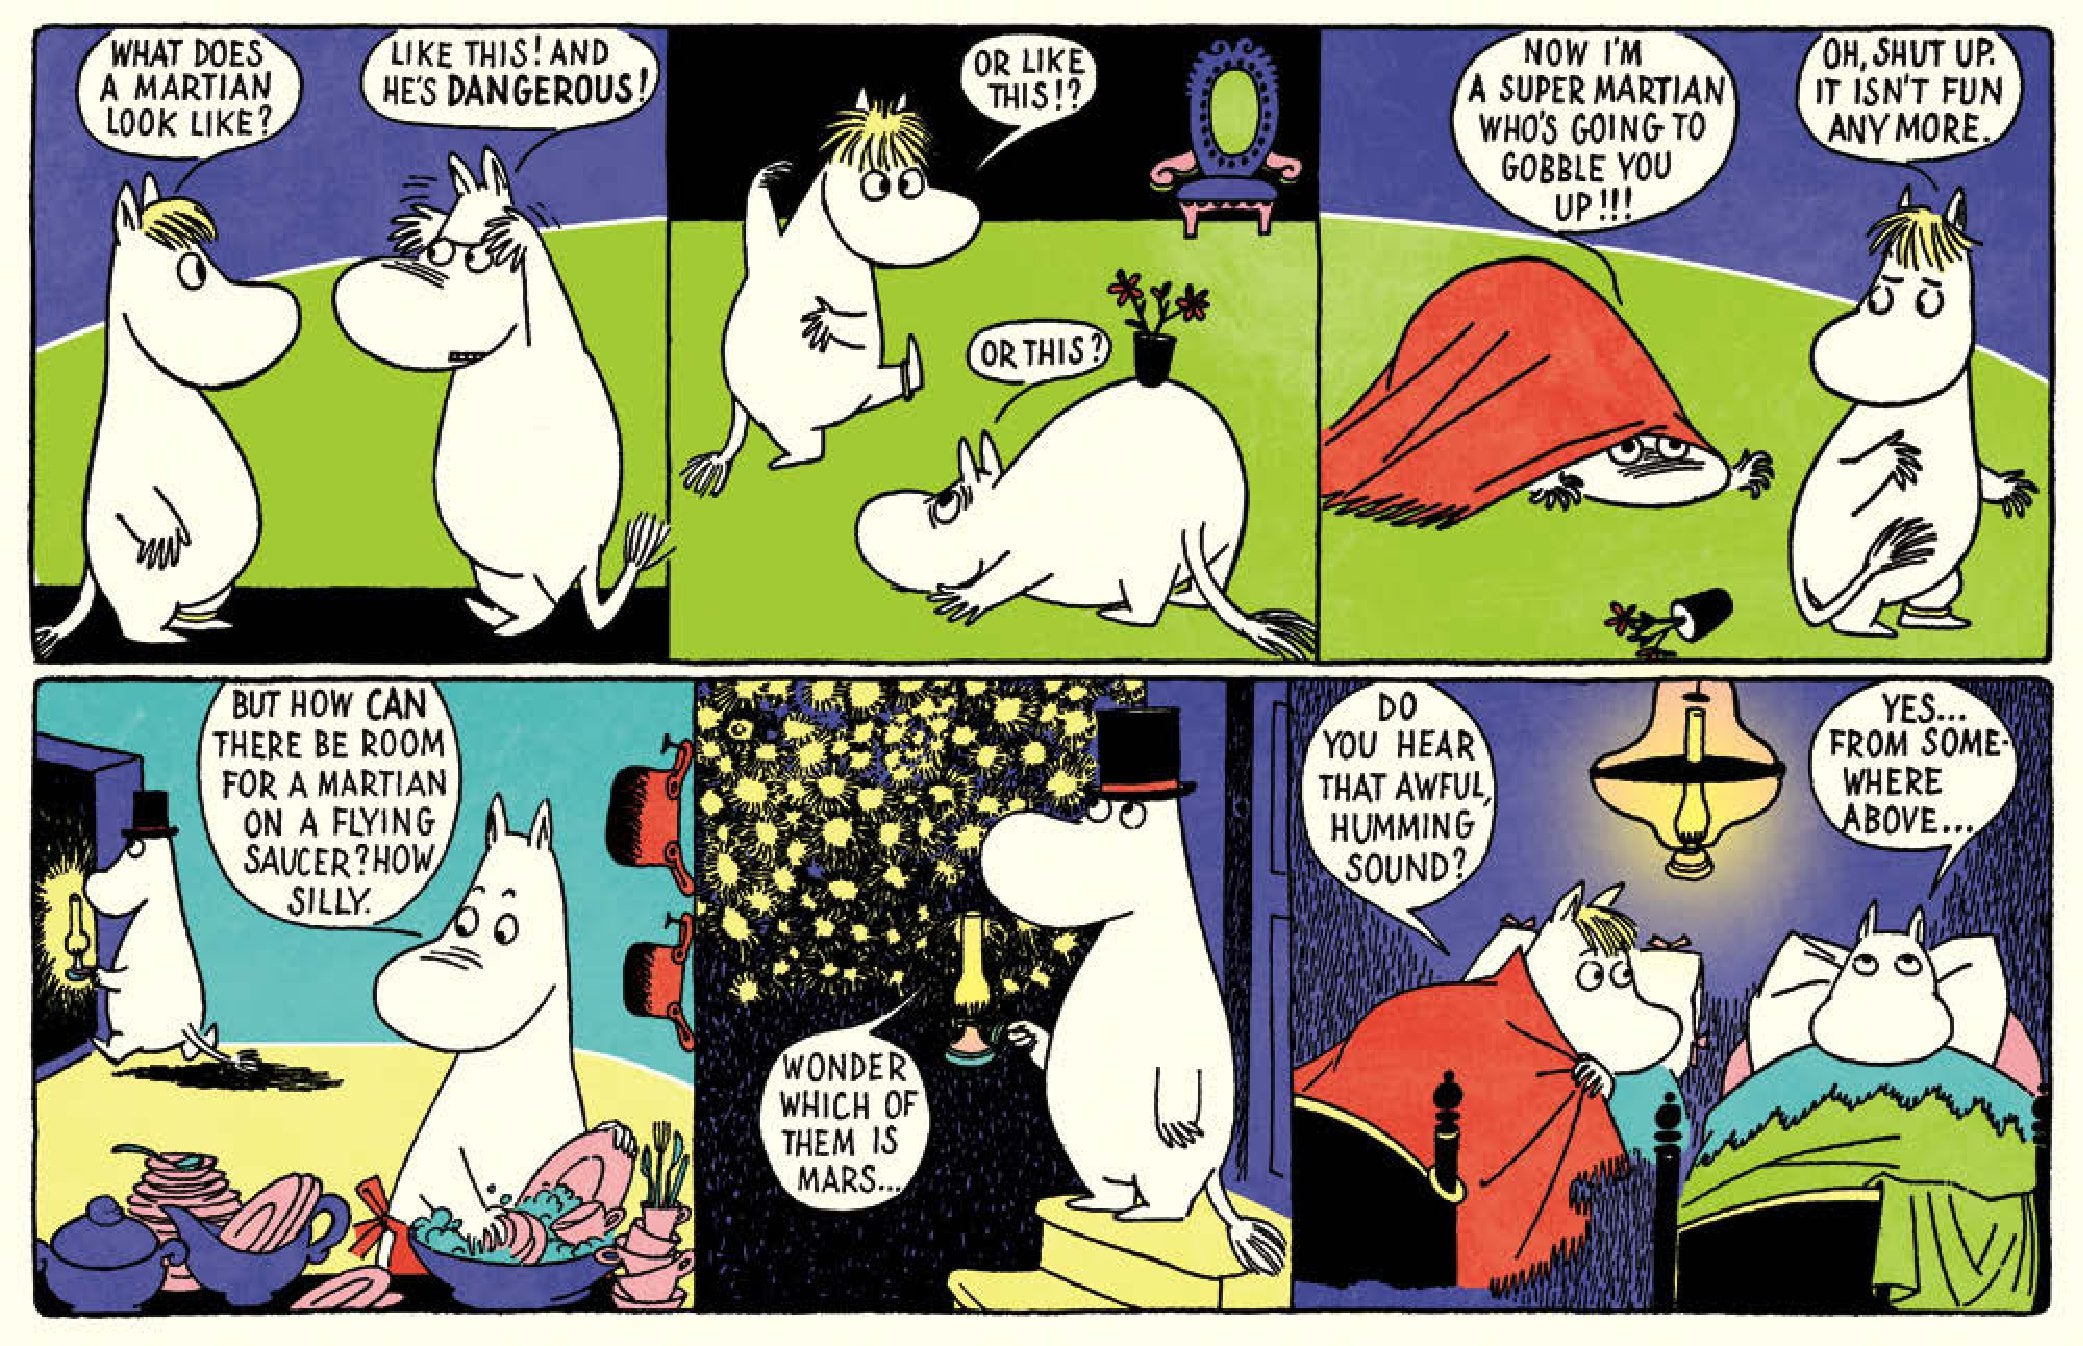 Moomin and the Martians